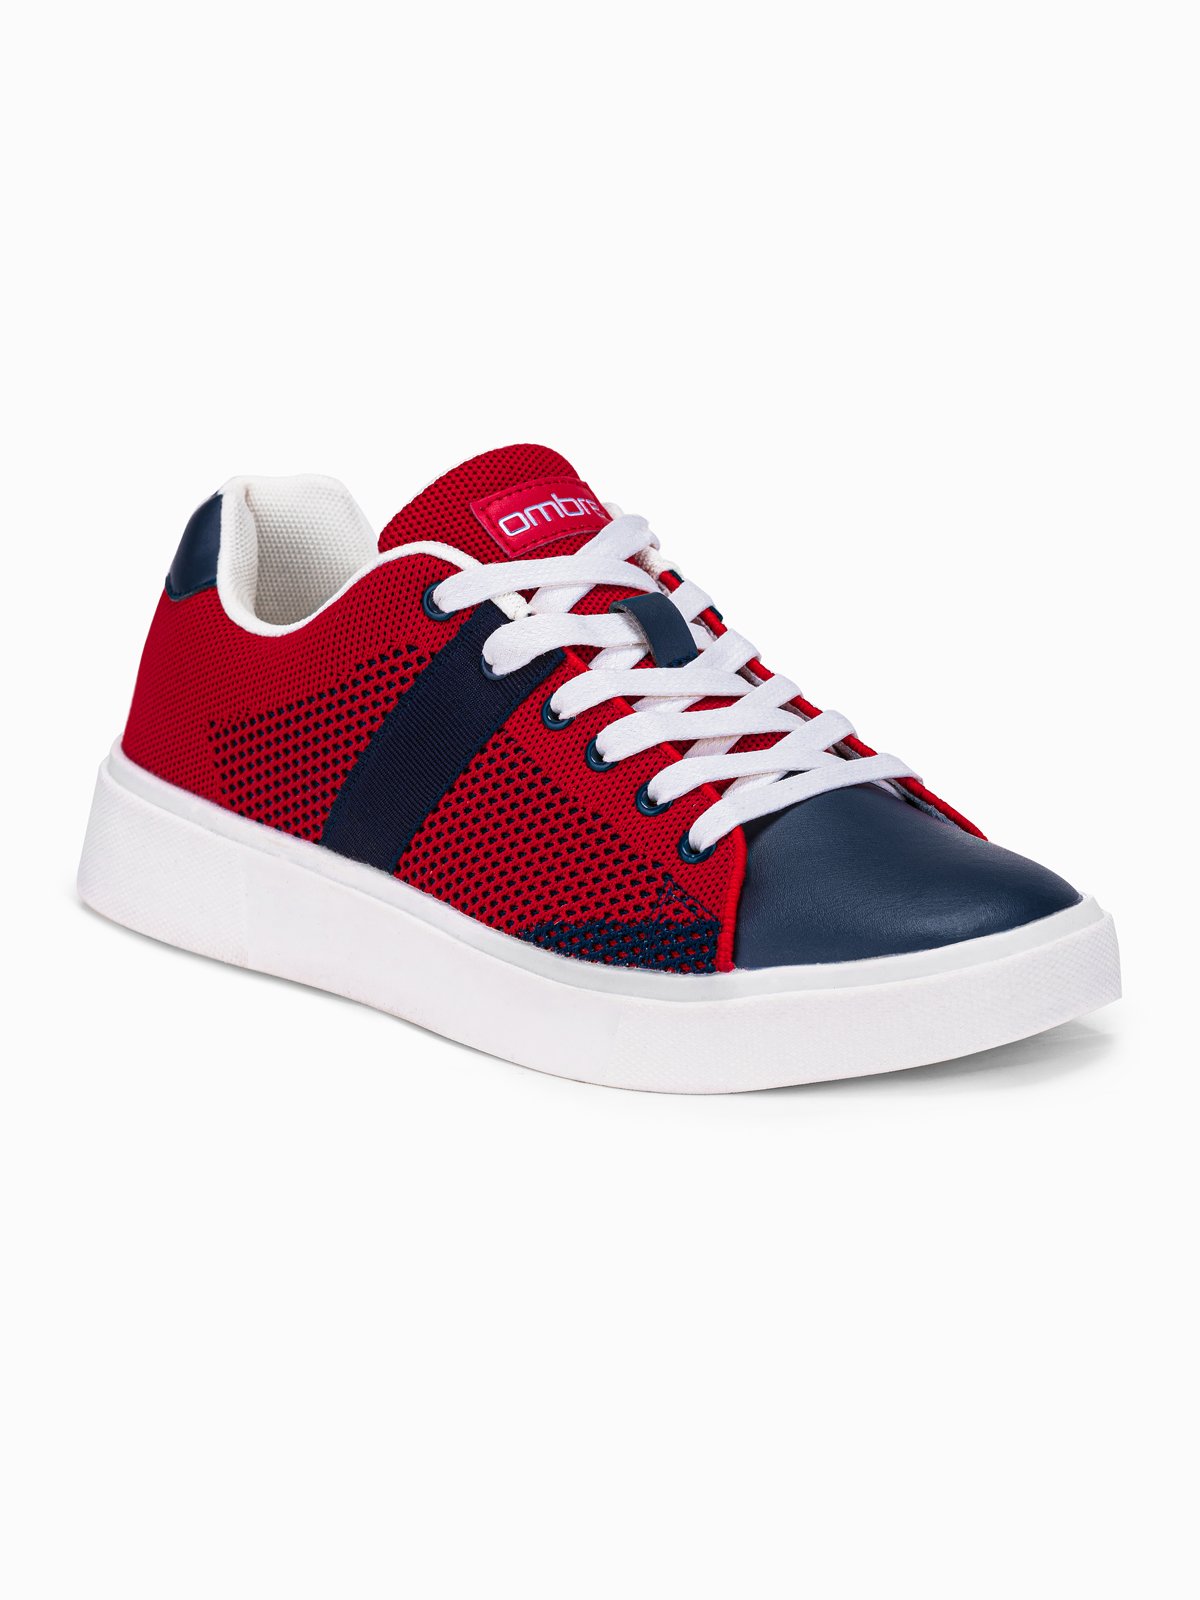 red high top trainers